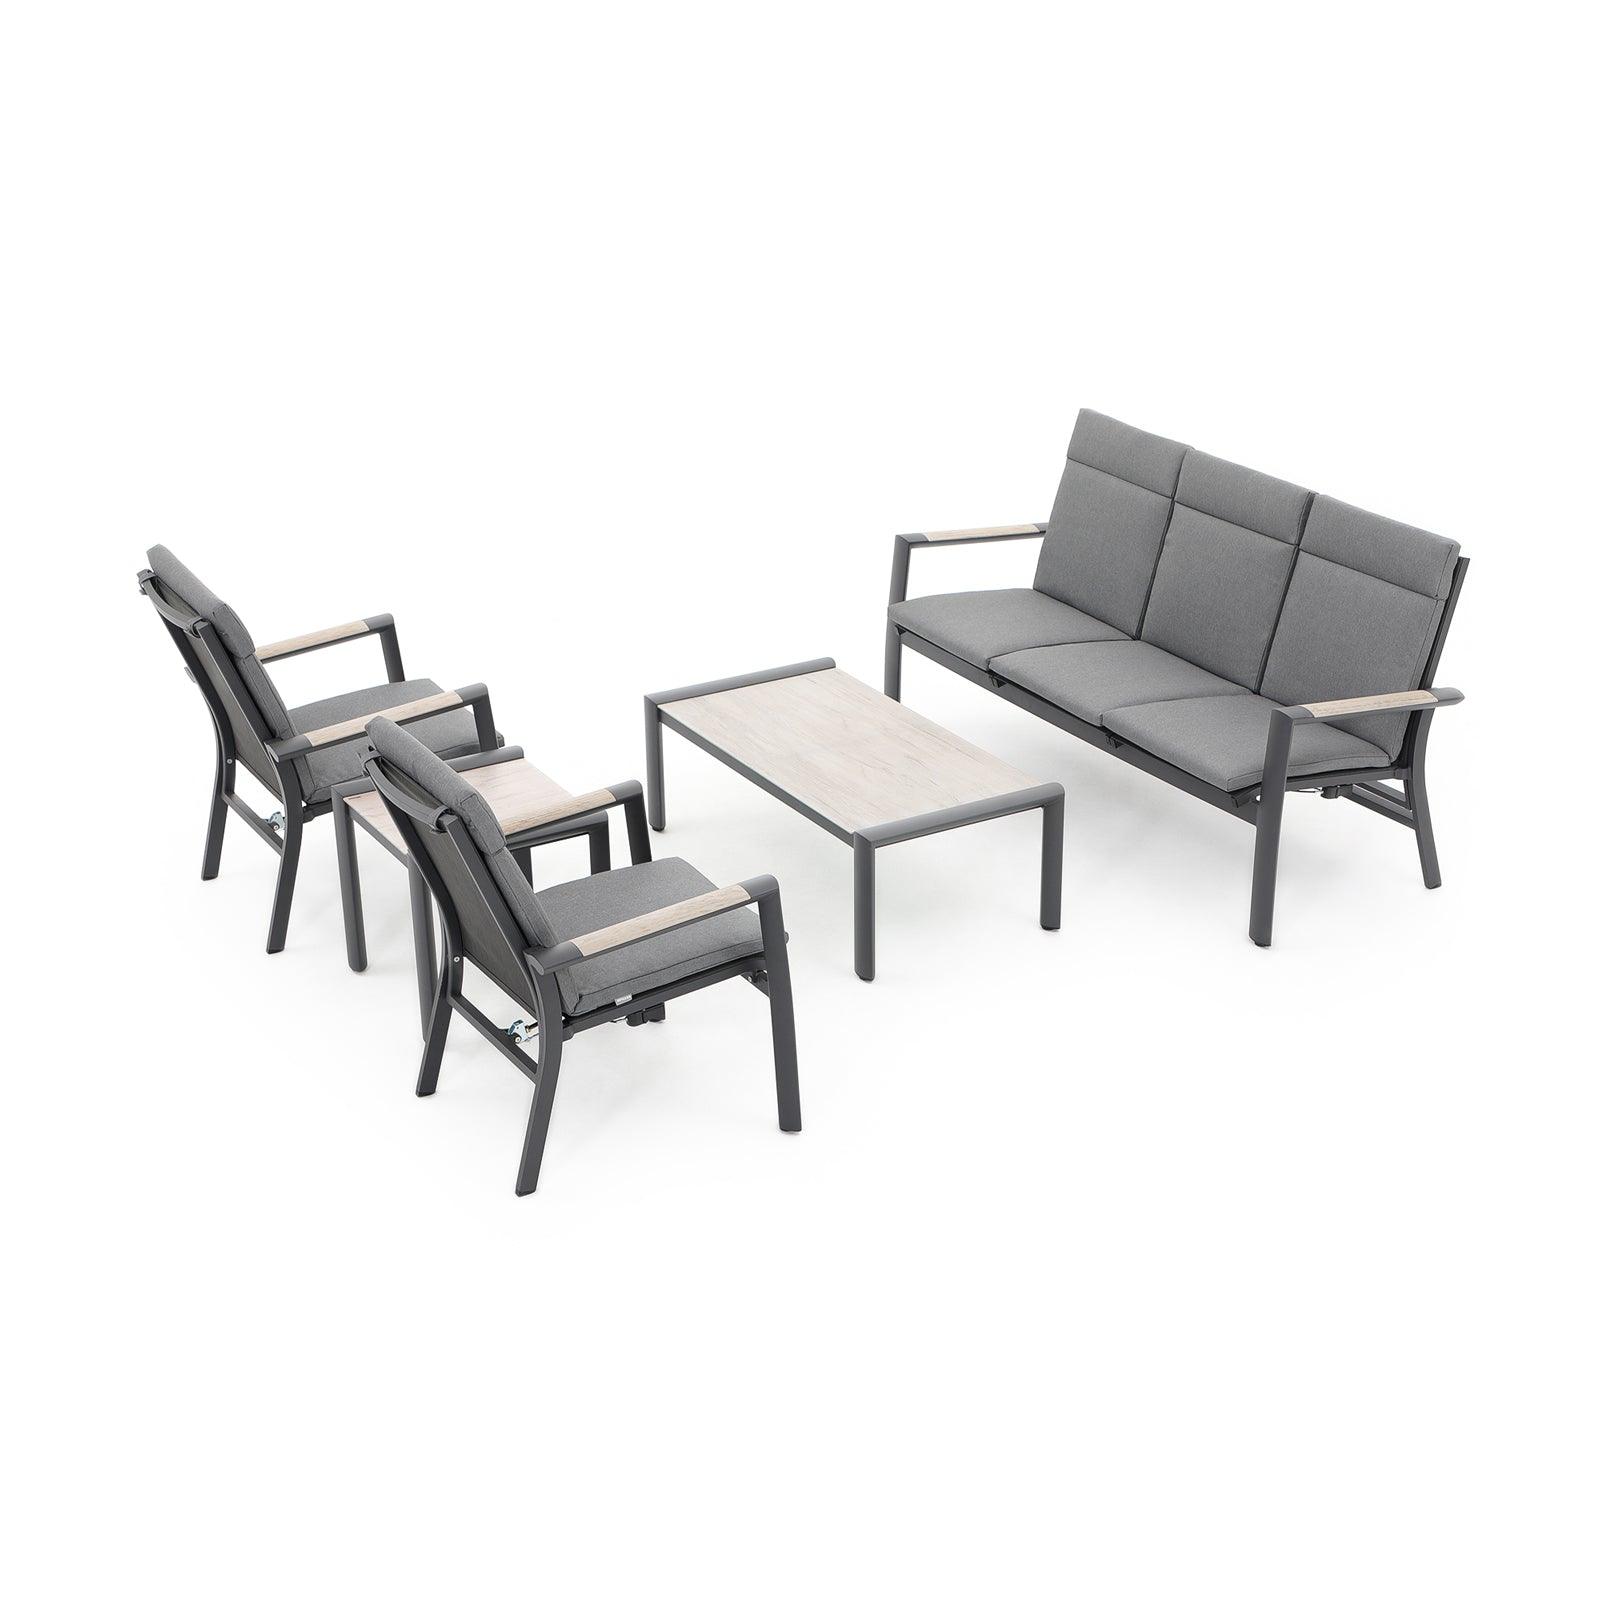 Capri 5-Piece grey aluminum outdoor conversation set with grey cushions, 1 three-seater sofa with adjustable backrest, 2 armchairs with adjustable backrest, 1 rectangle coffee table, 1 square side table - Jardina Furniture-1